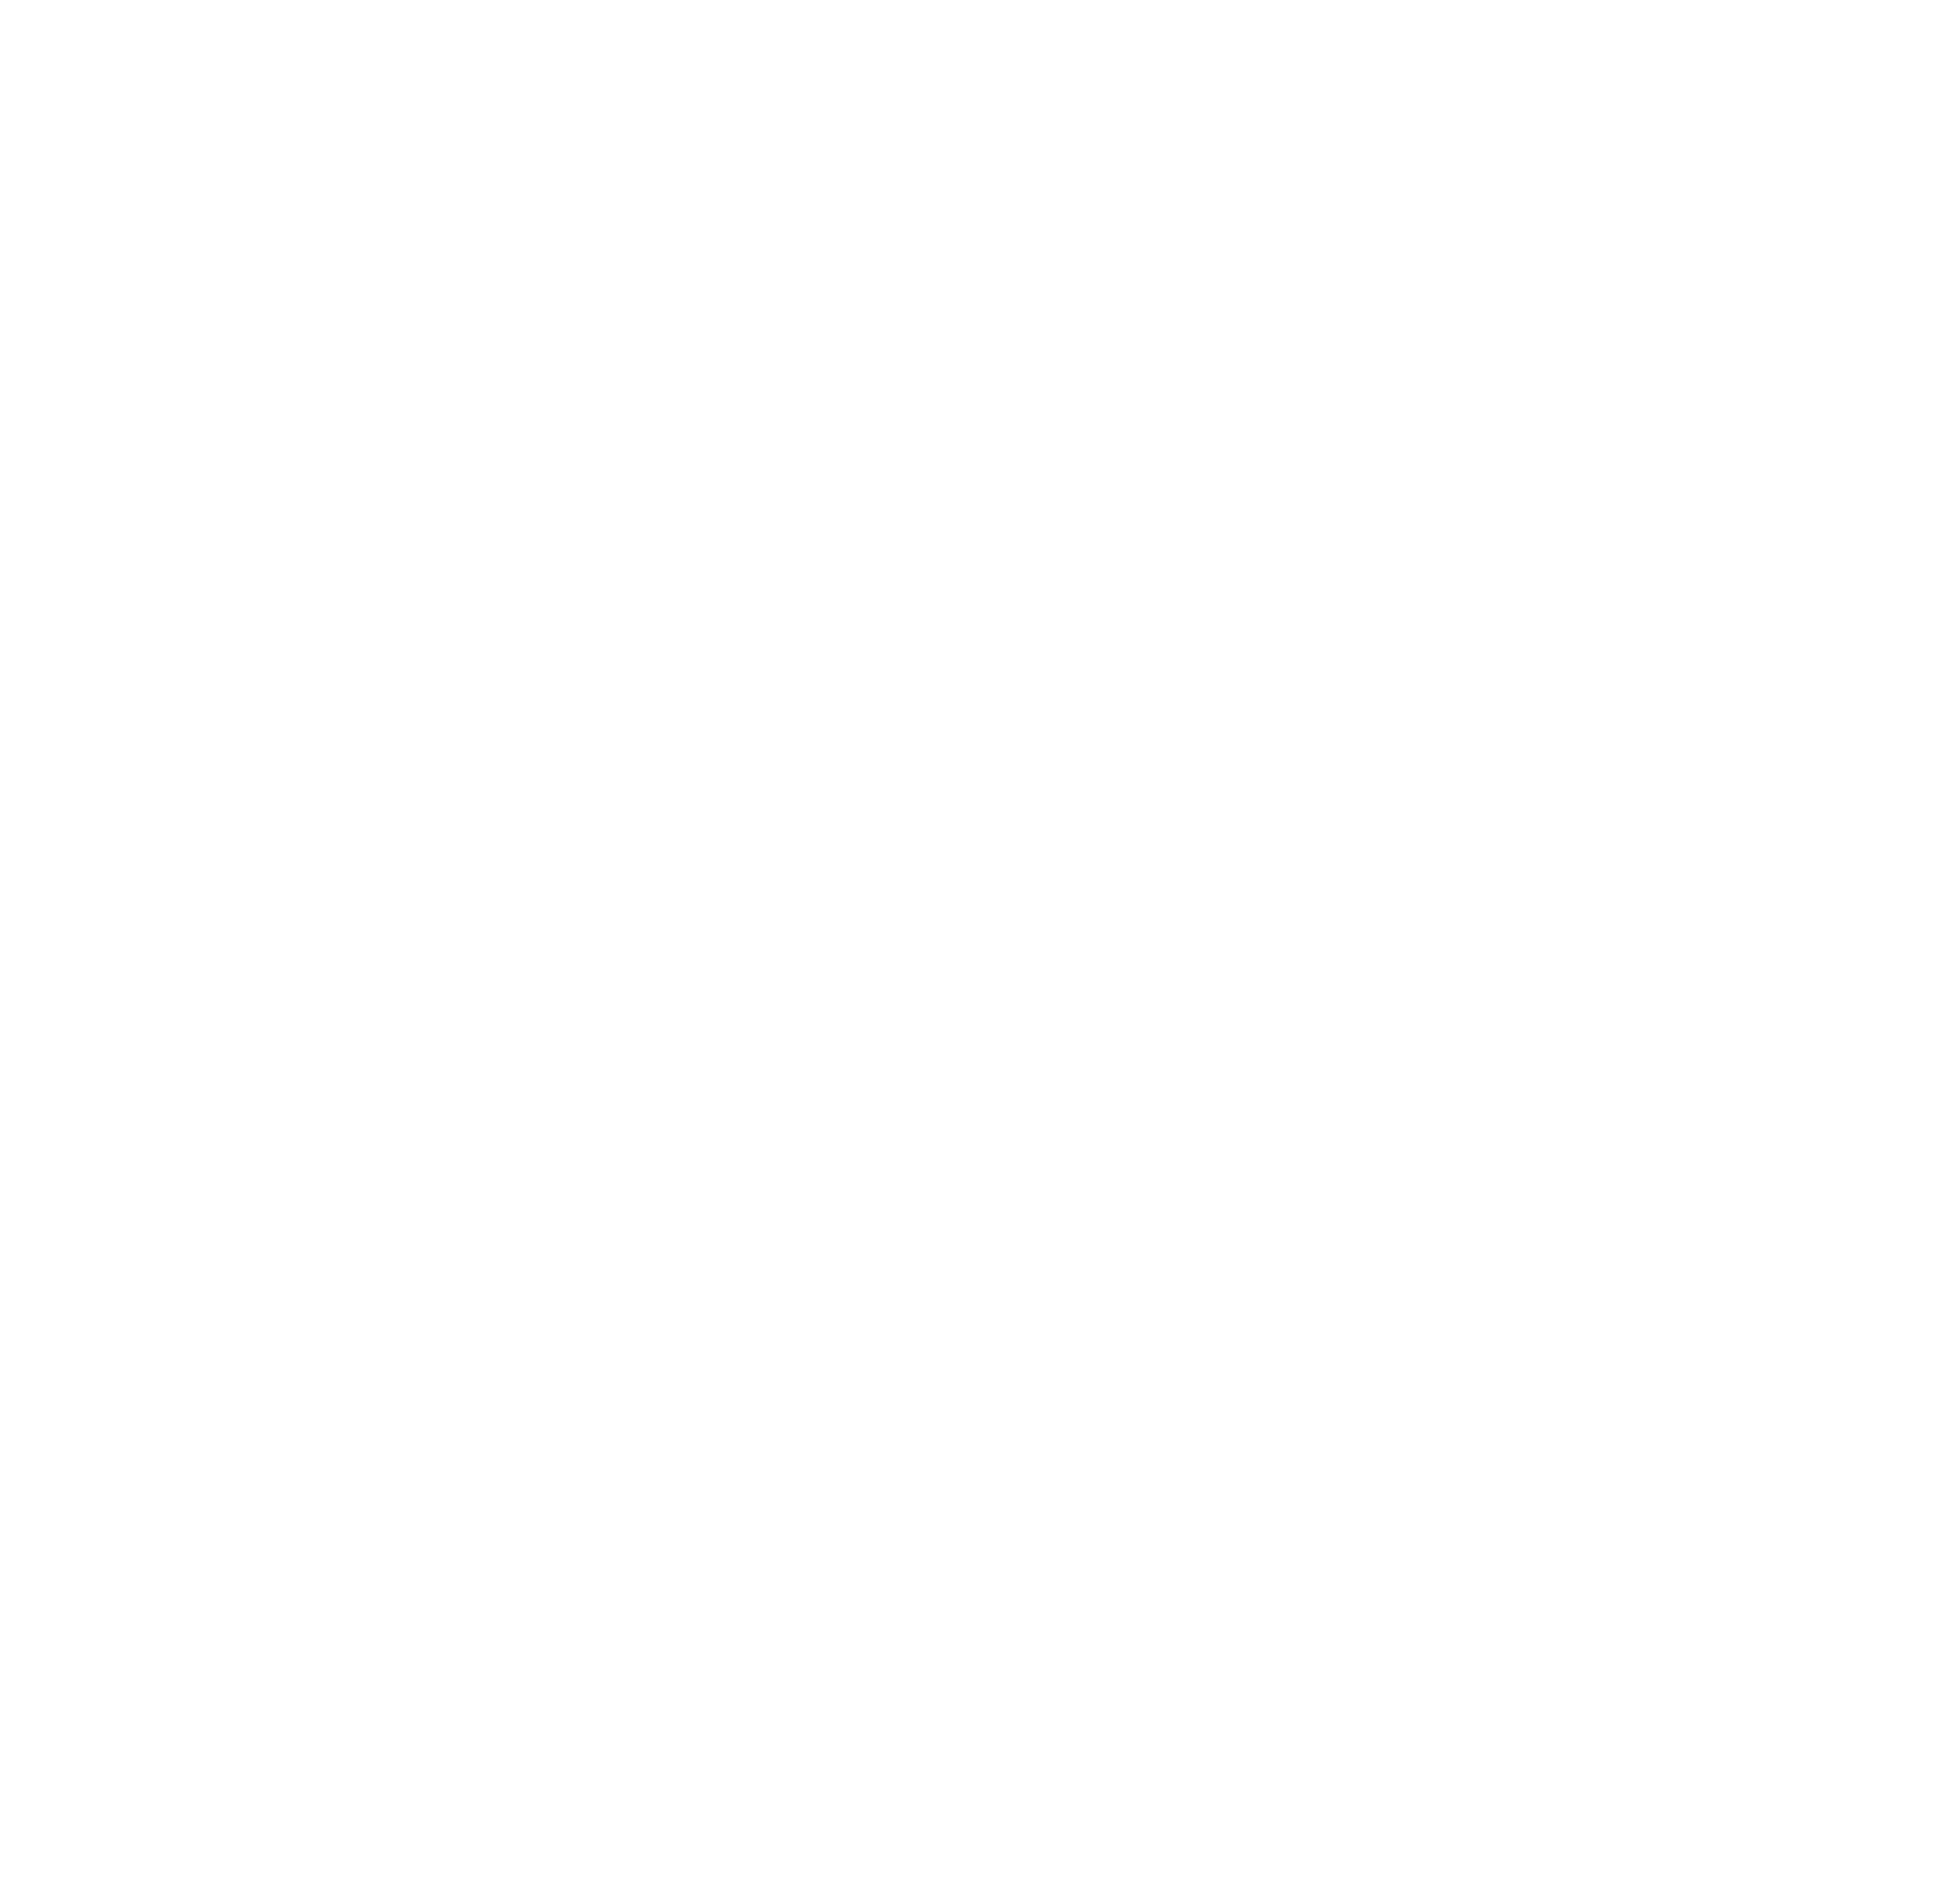 Promotion Efficiency - Marketing and Advertising